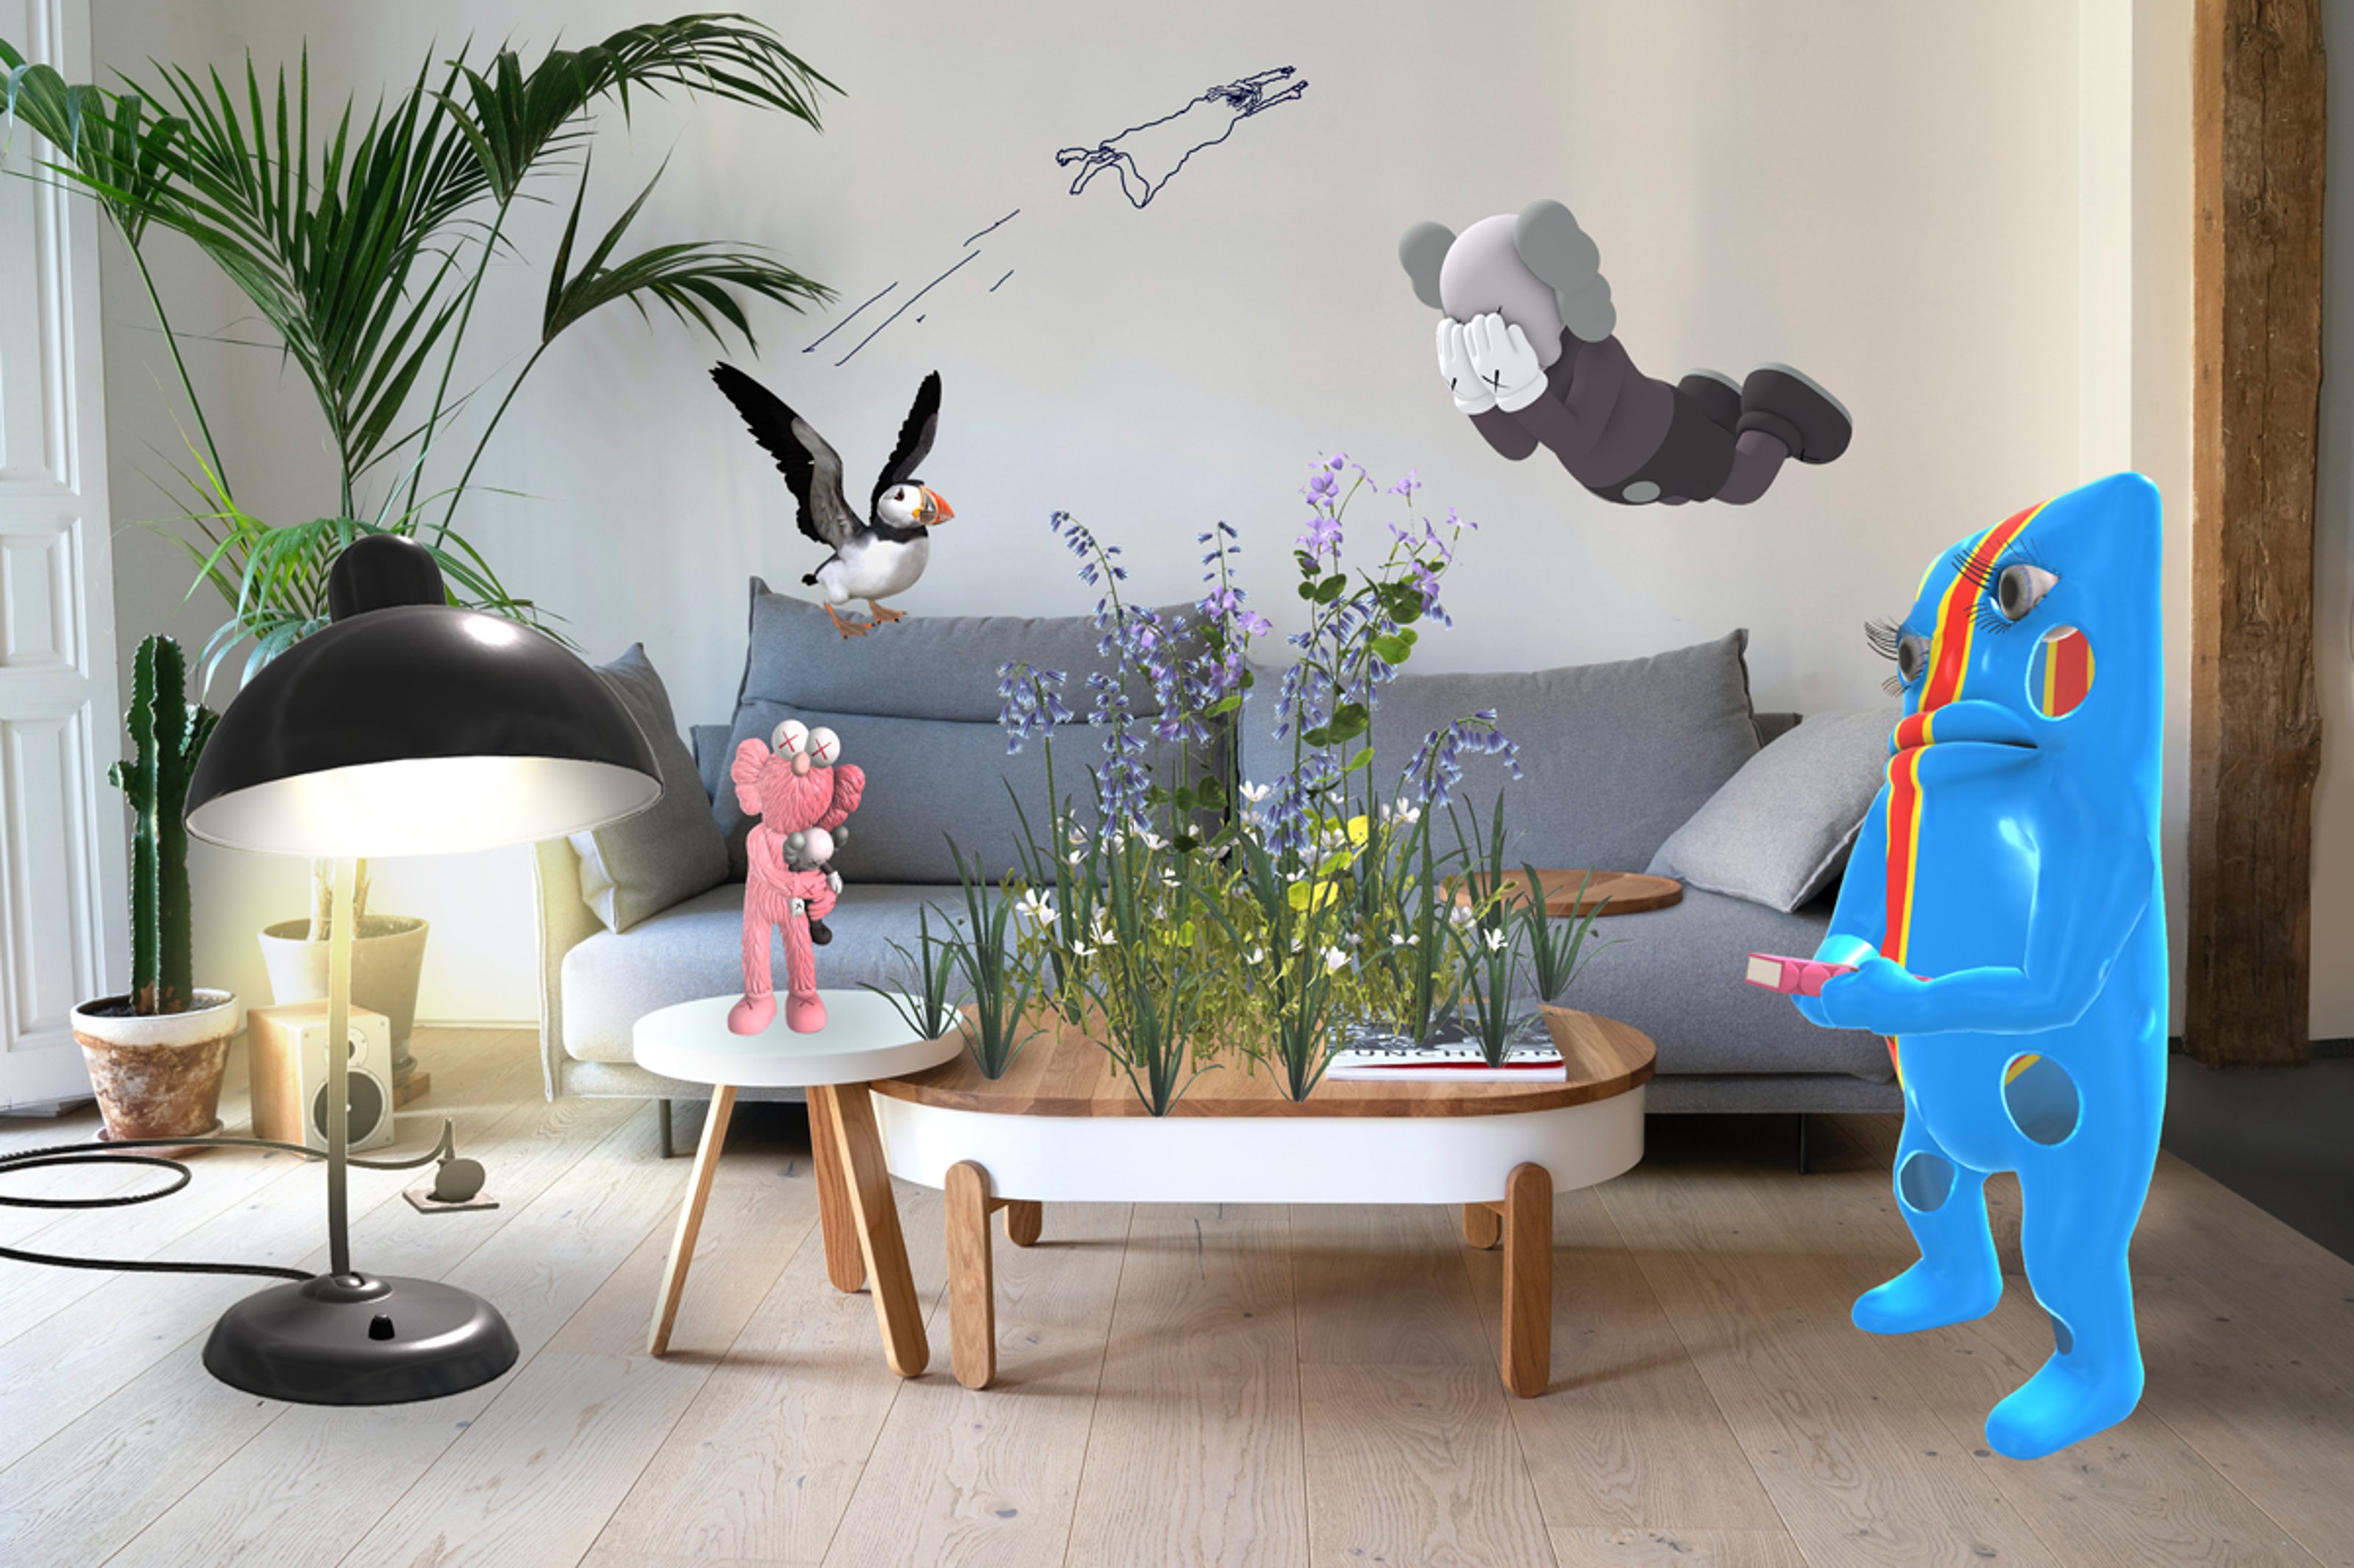 Various digital characters shown in interior home space